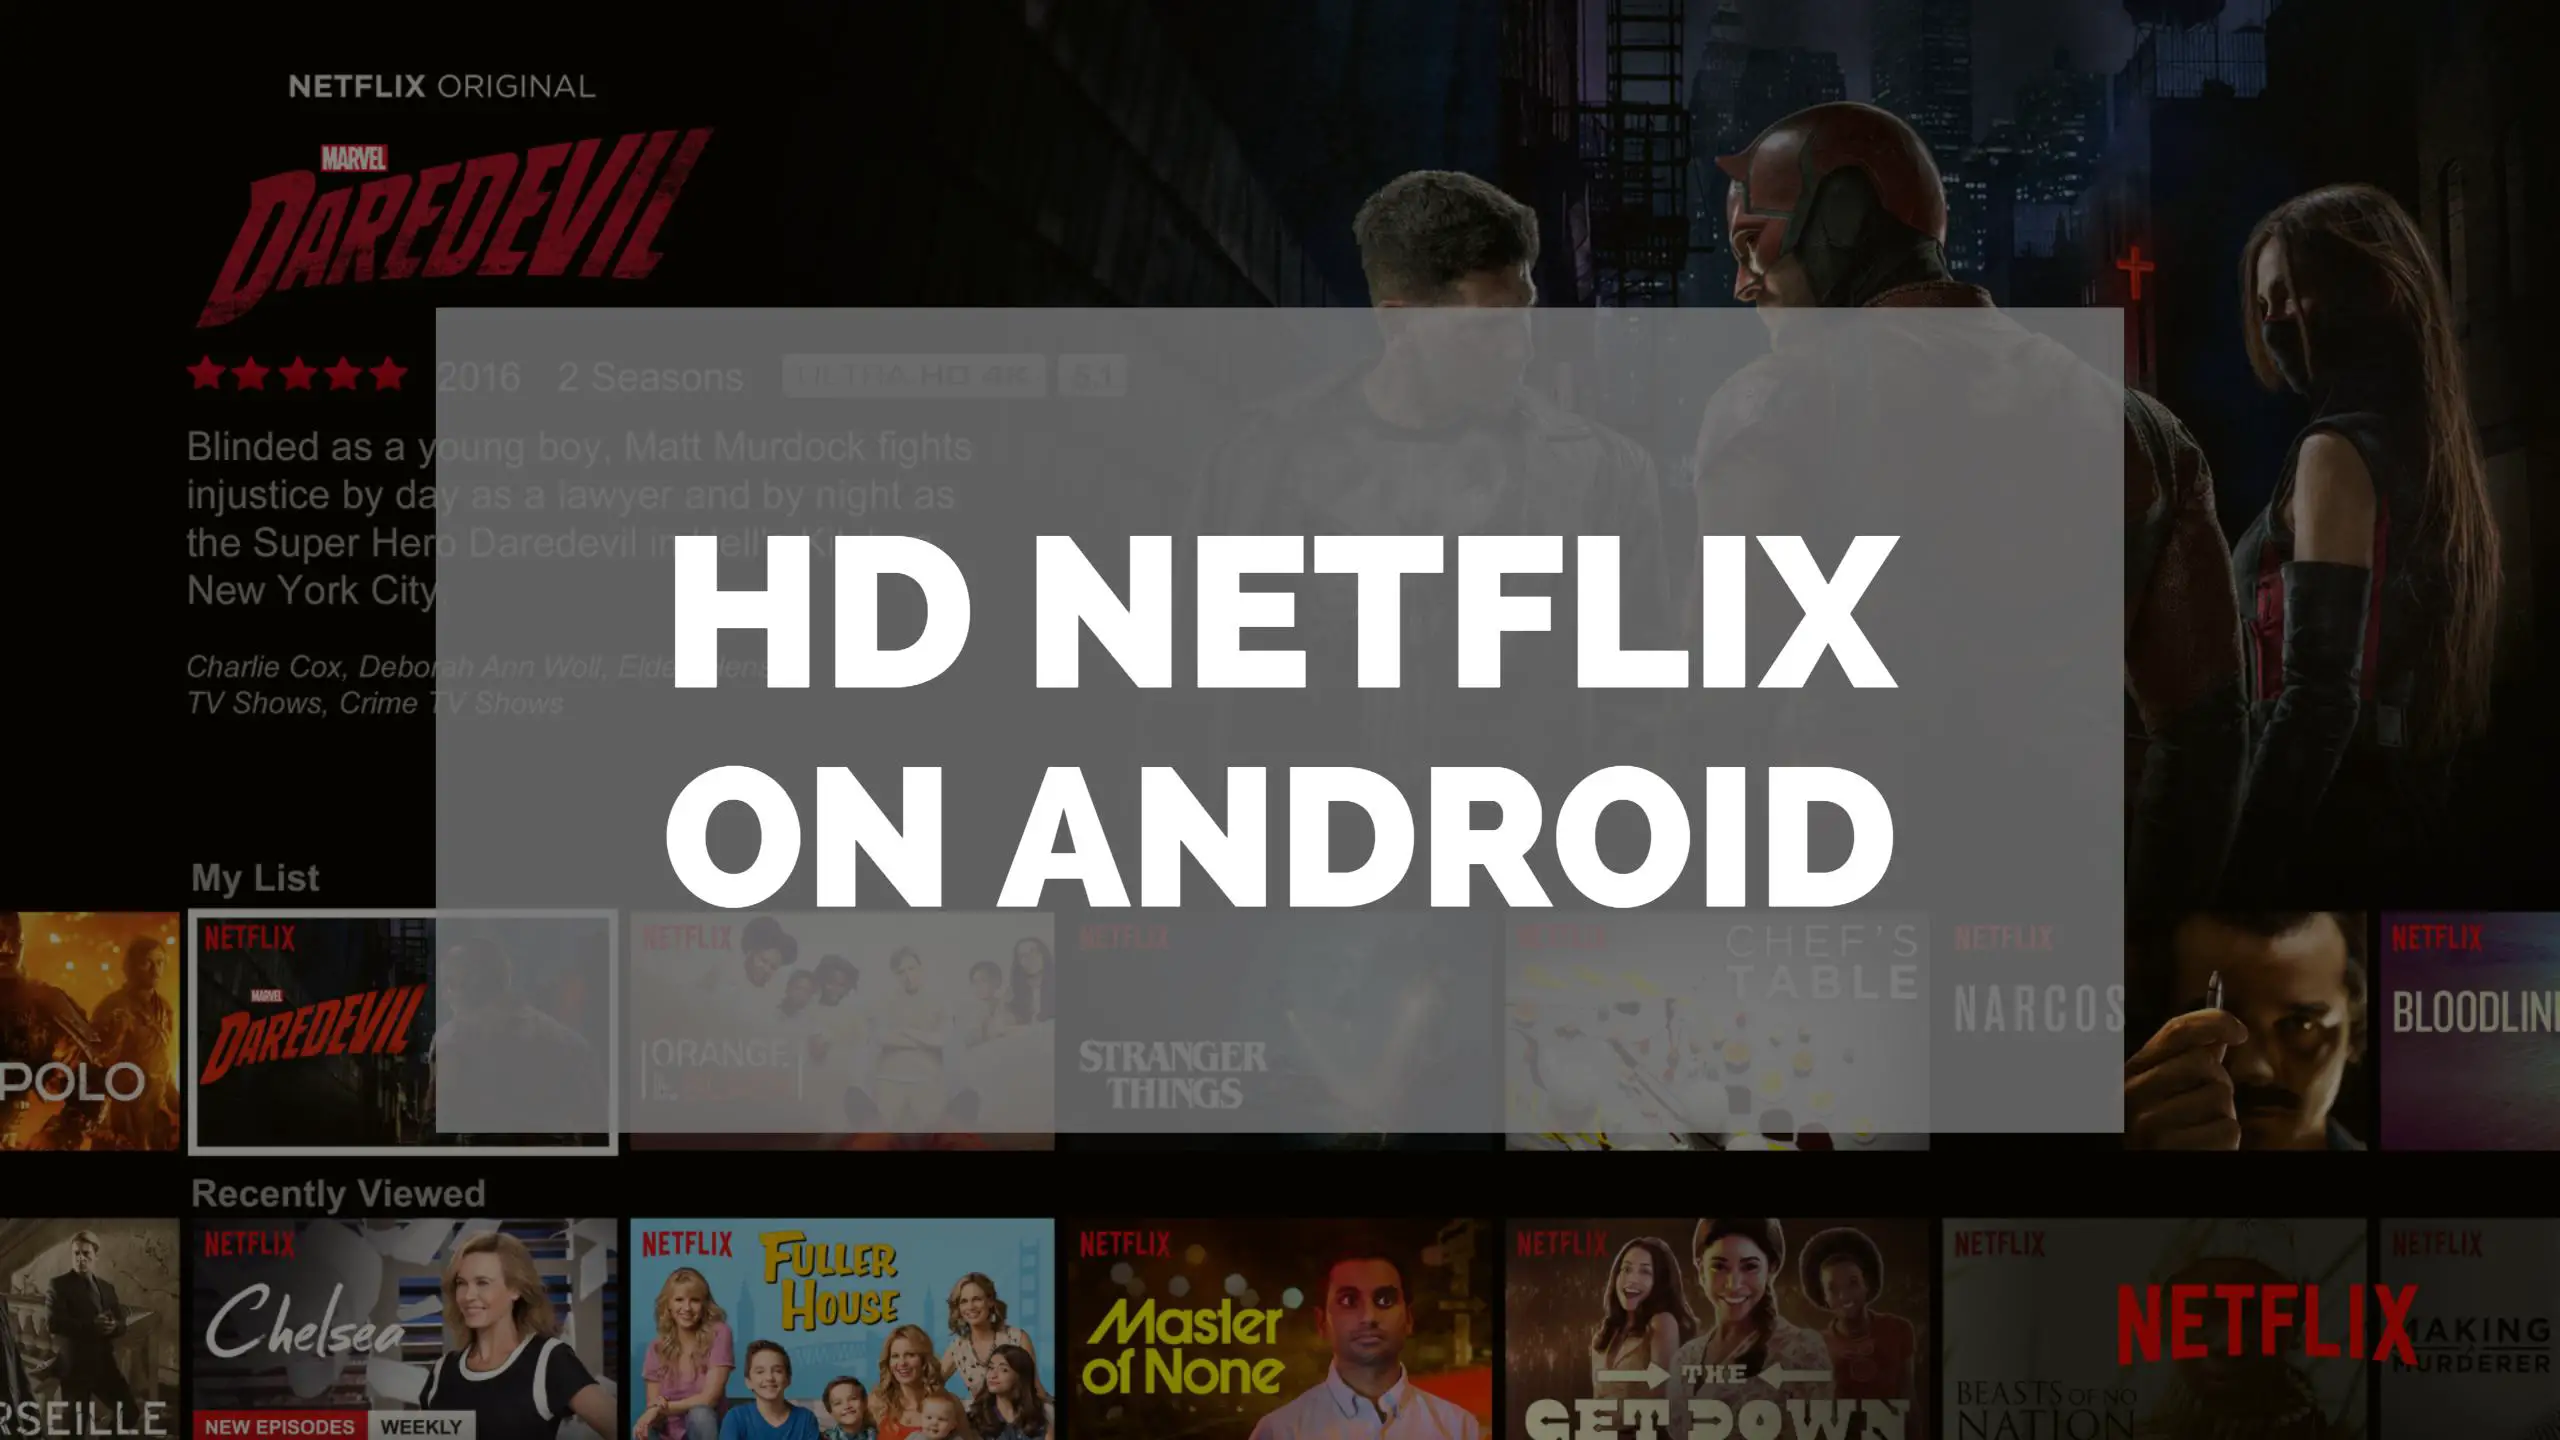 HD Netflix on Android Featured Image